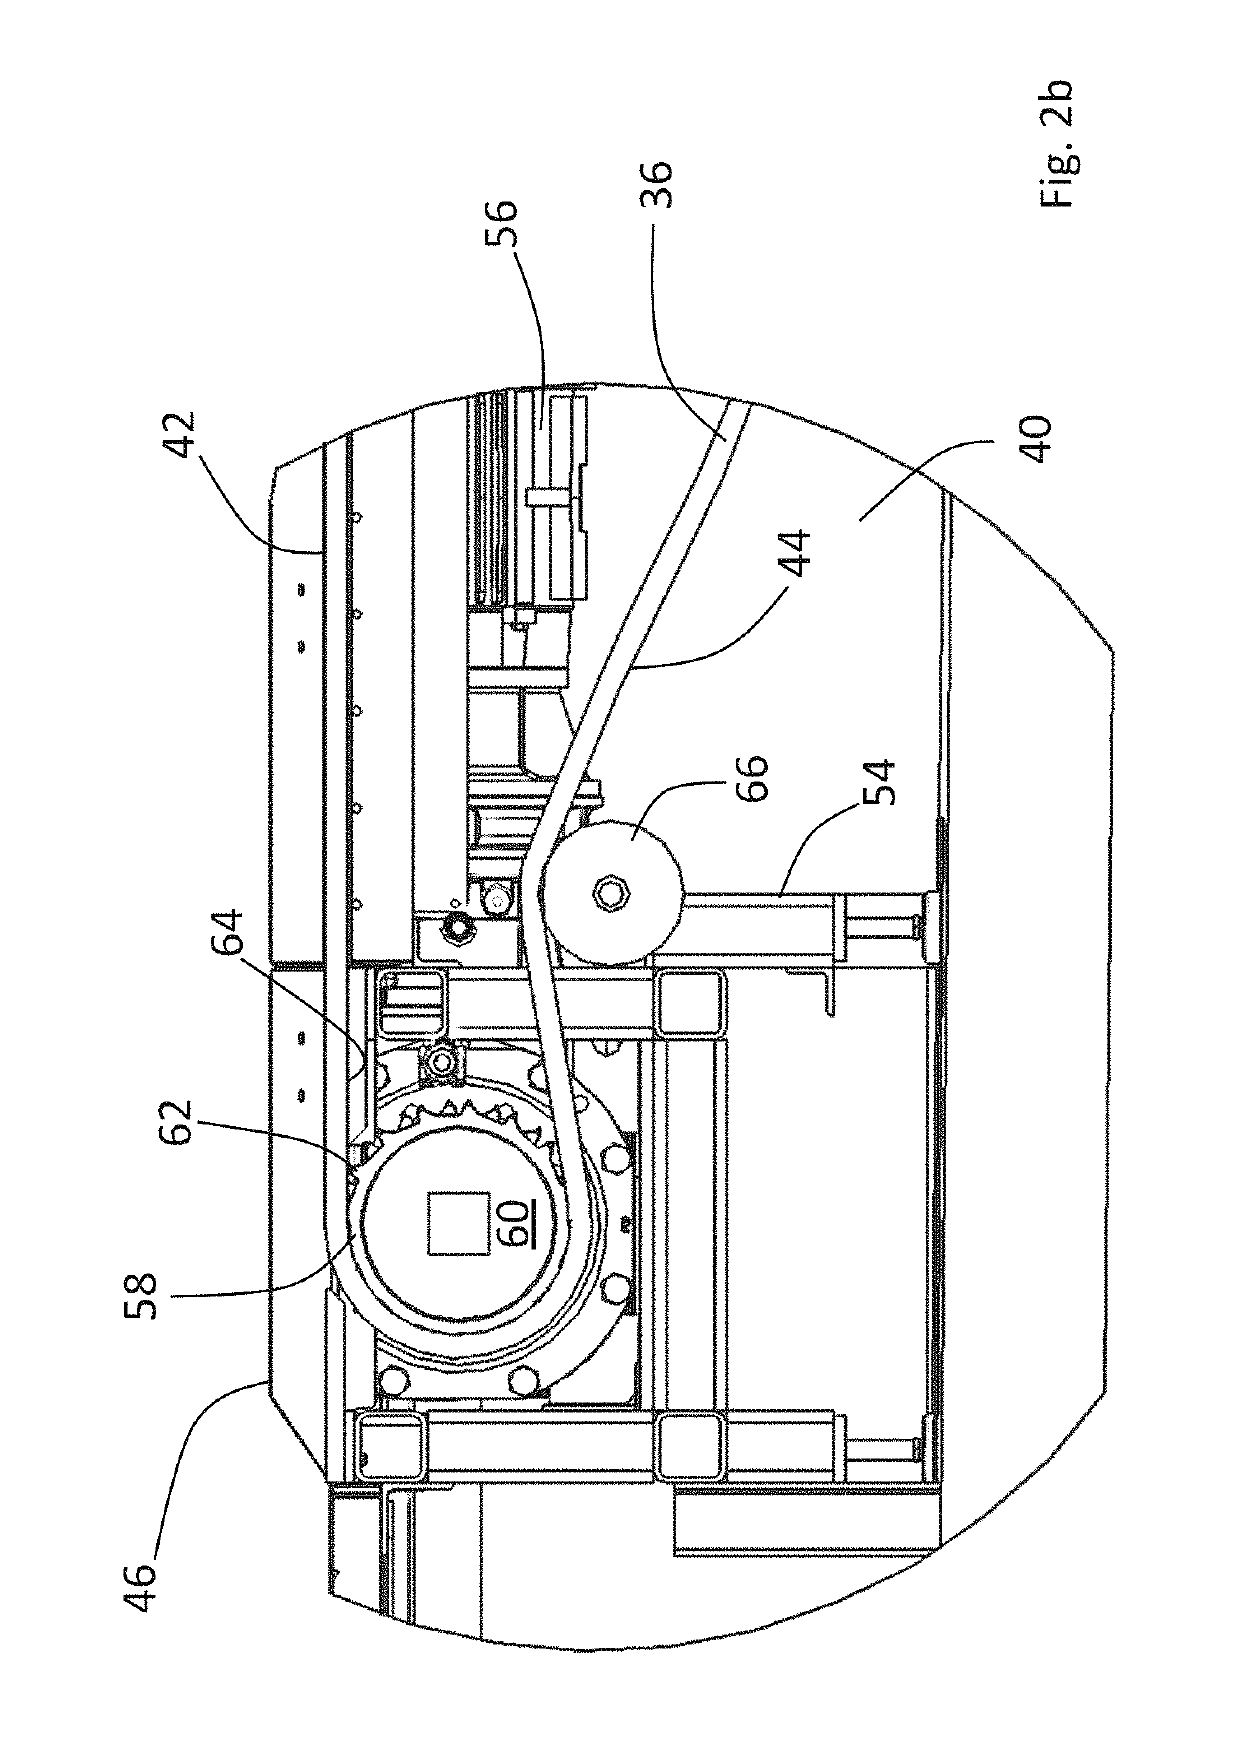 Belt contact surface with inserts, and a conveyor system using same